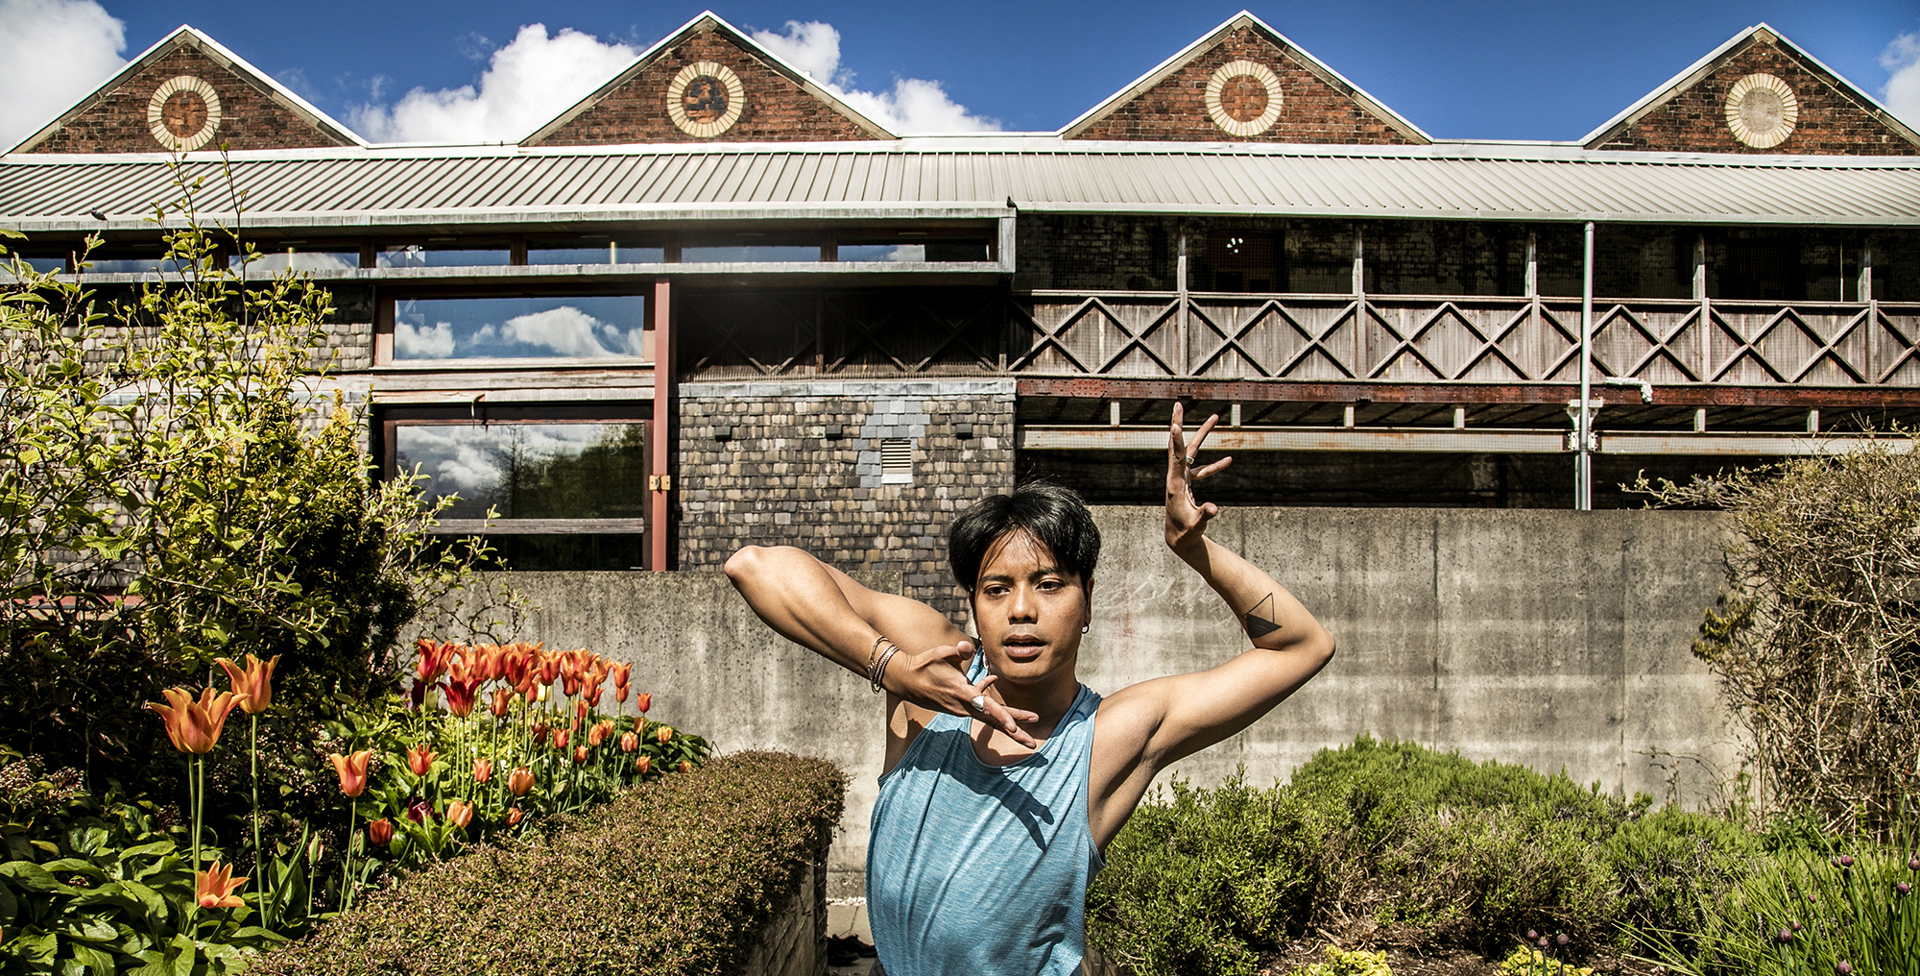 Global majority male dancer with short black hair, centre of the image with hand framing his face. Wearing blue tank top in front of tulips and triangular shaped building 